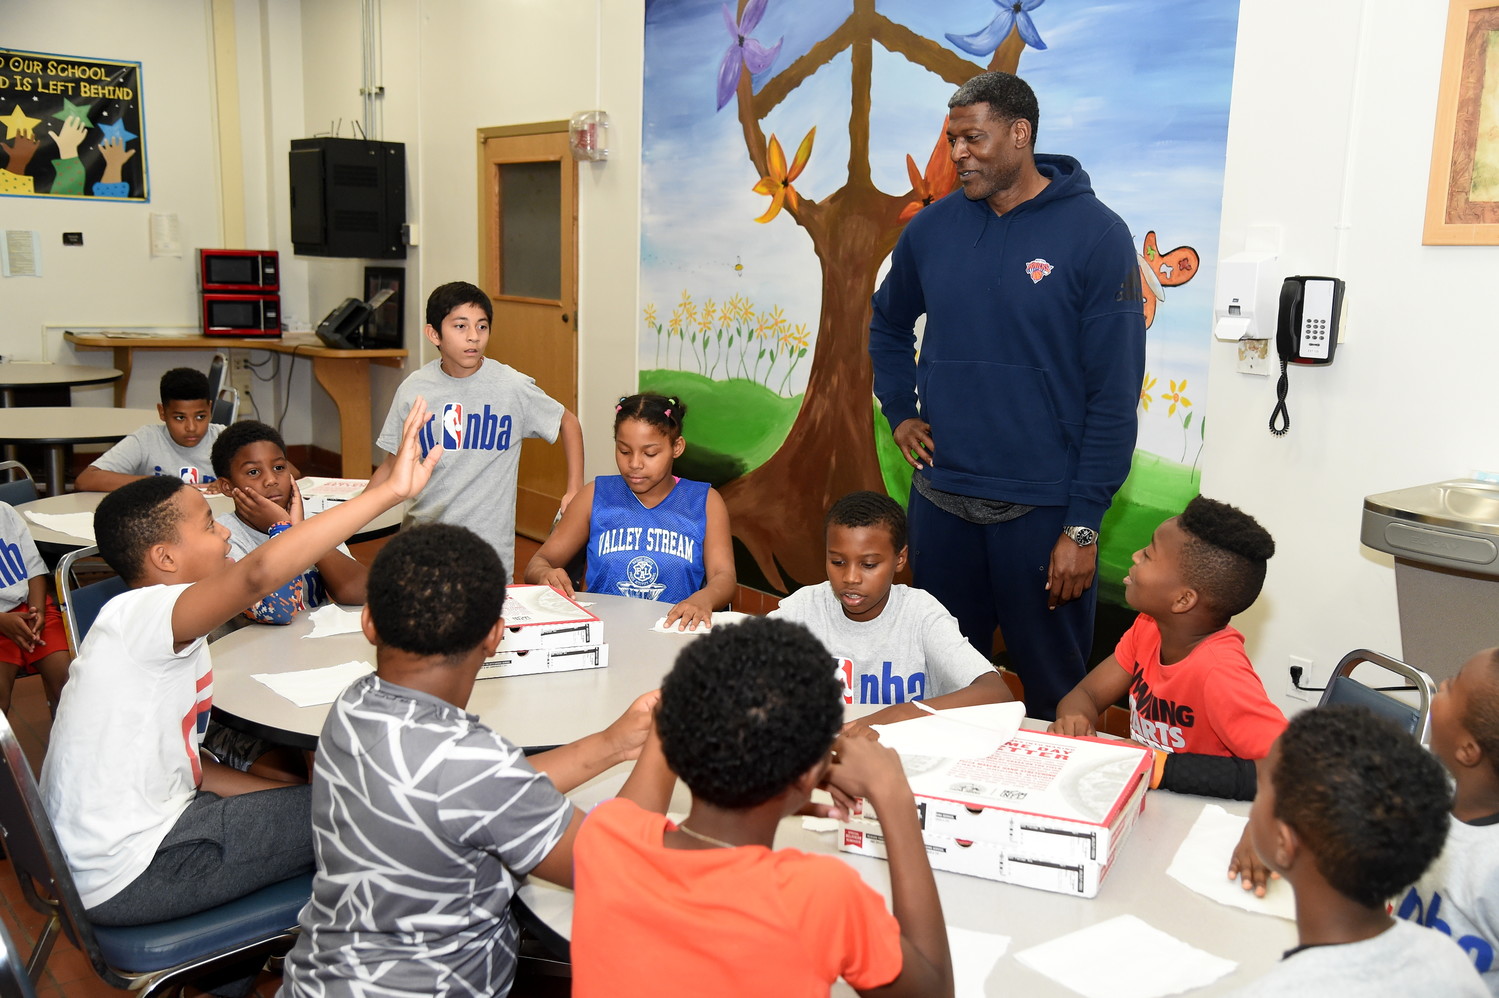 Larry Johnson, right, had pizza with a group of kids who played during the Knicks’ halftime show in their game against the Washington Wizards on Oct. 13.